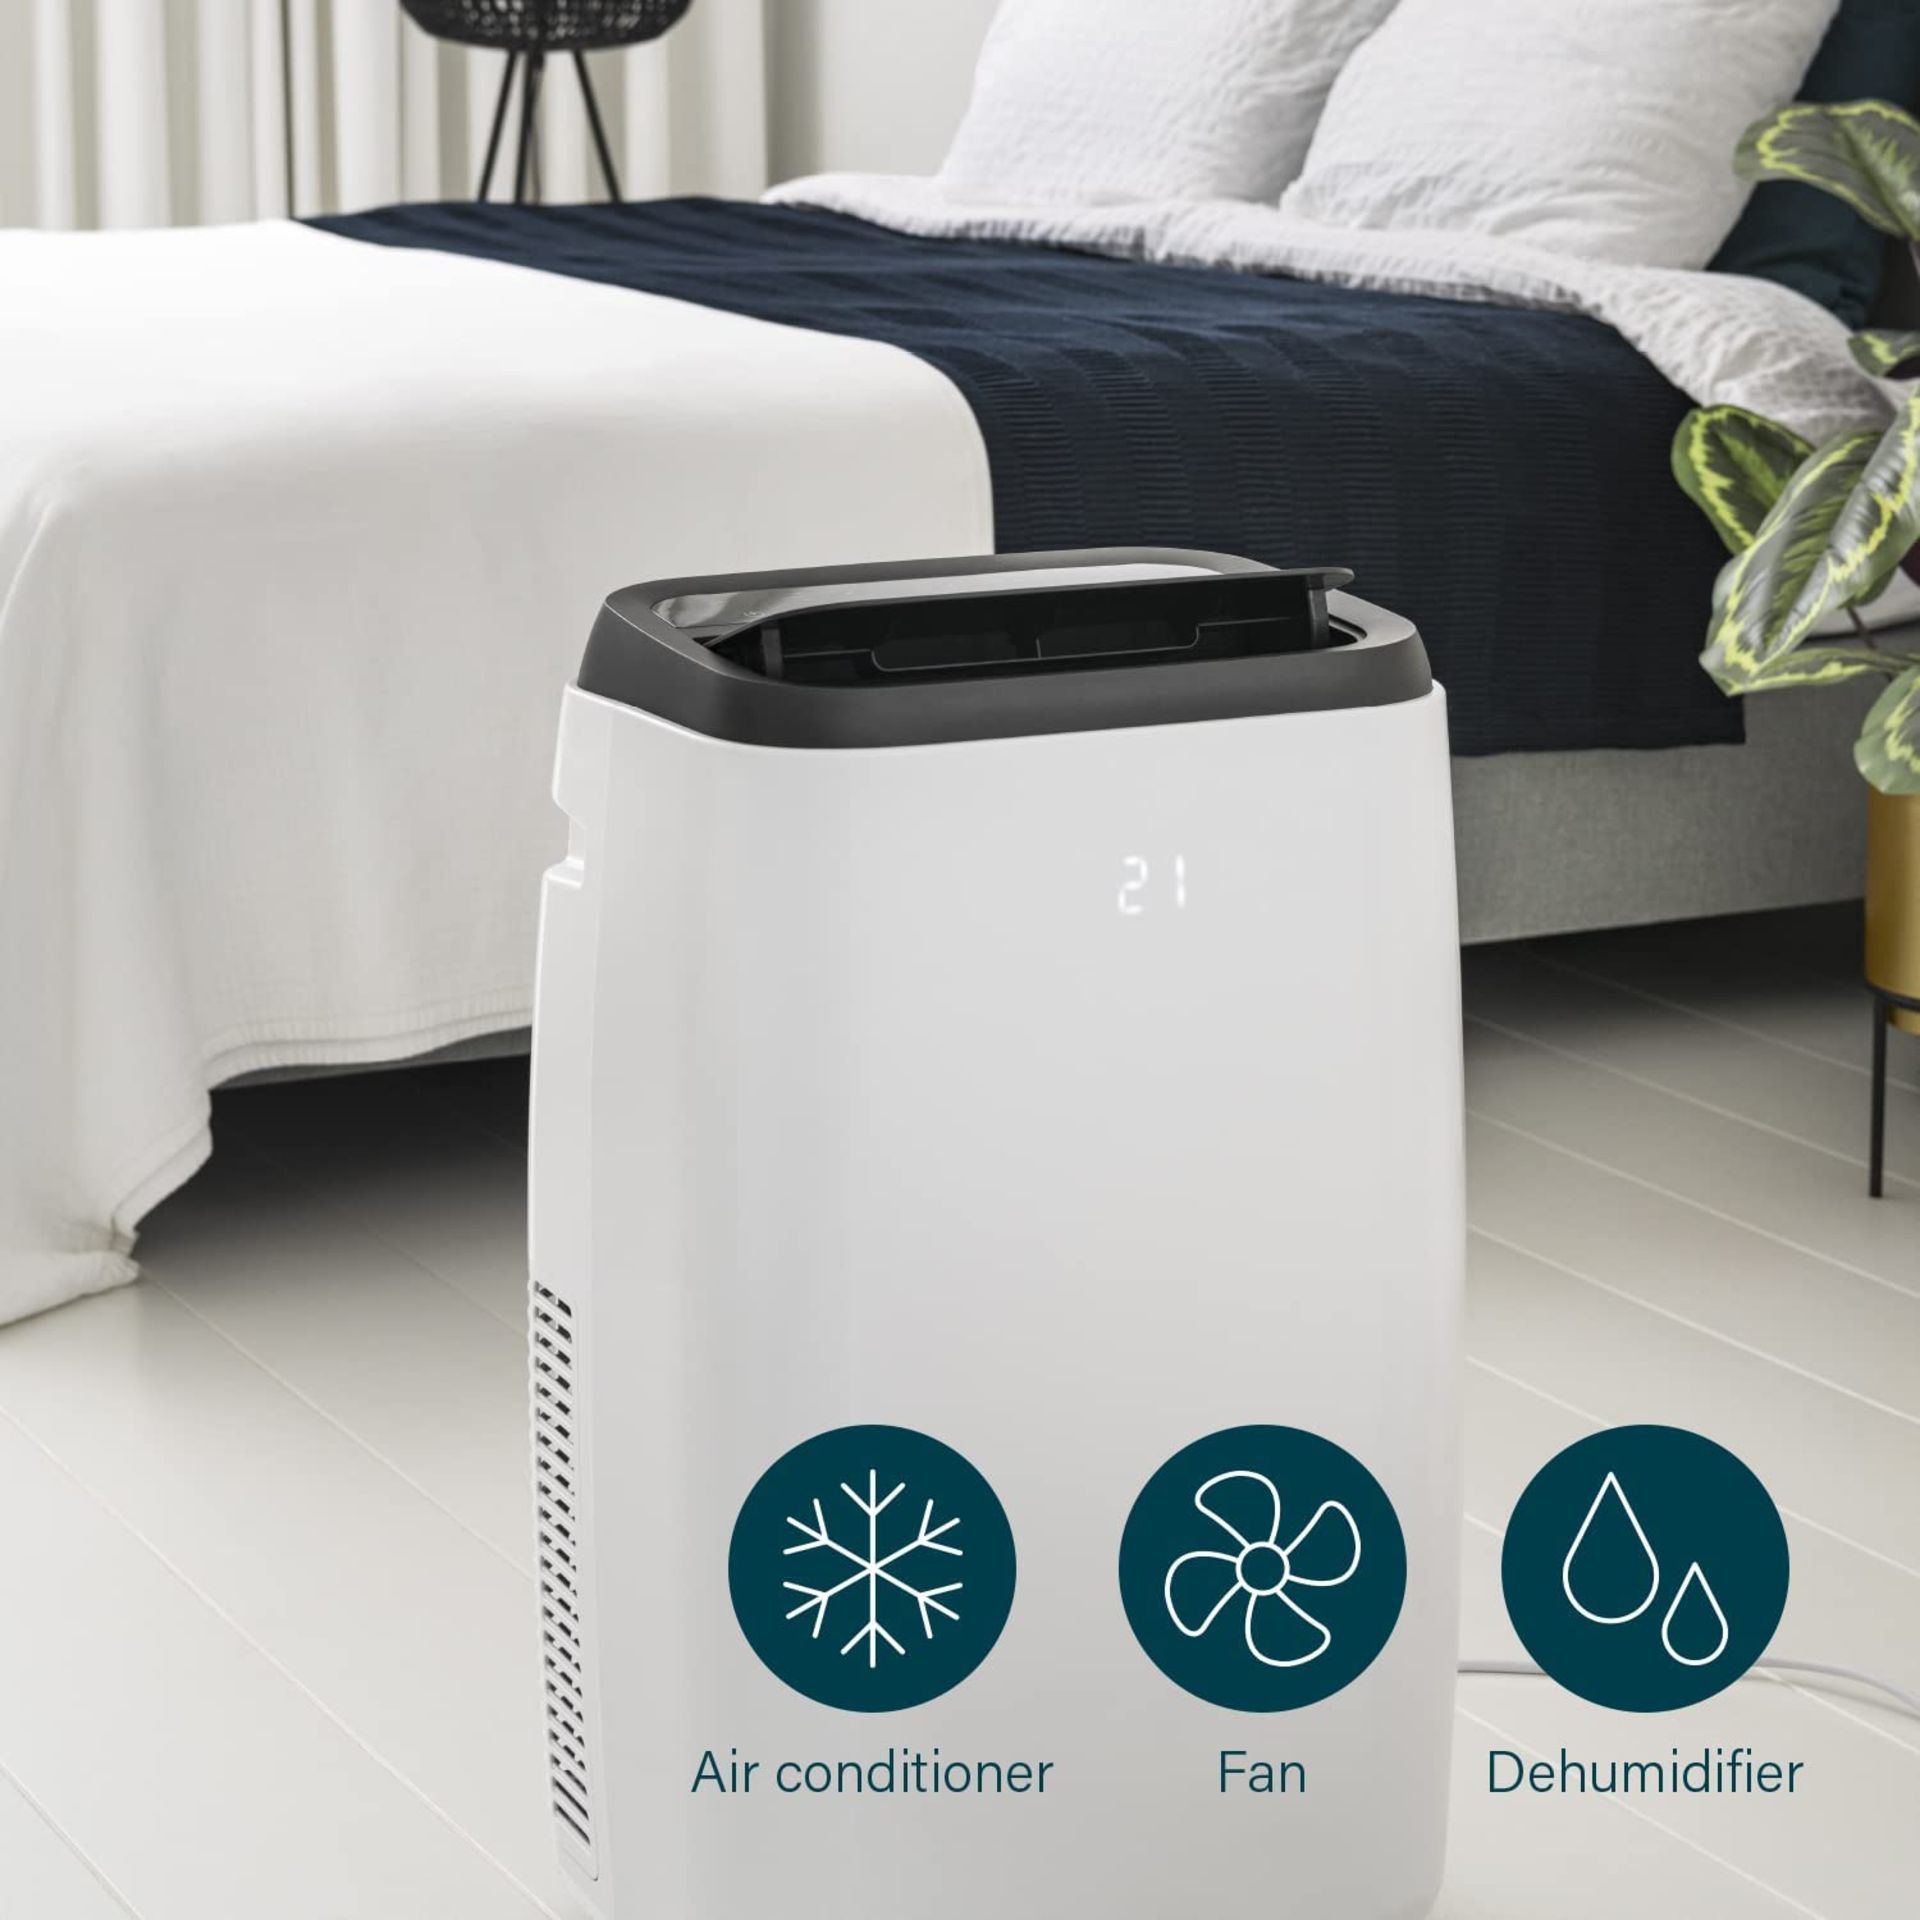 Princess Mobile Air Conditioner. 3 IN 1 SMART WIFI. 12,000 BTU, Smart and Voice Control, 3.5 kW, - Image 2 of 3